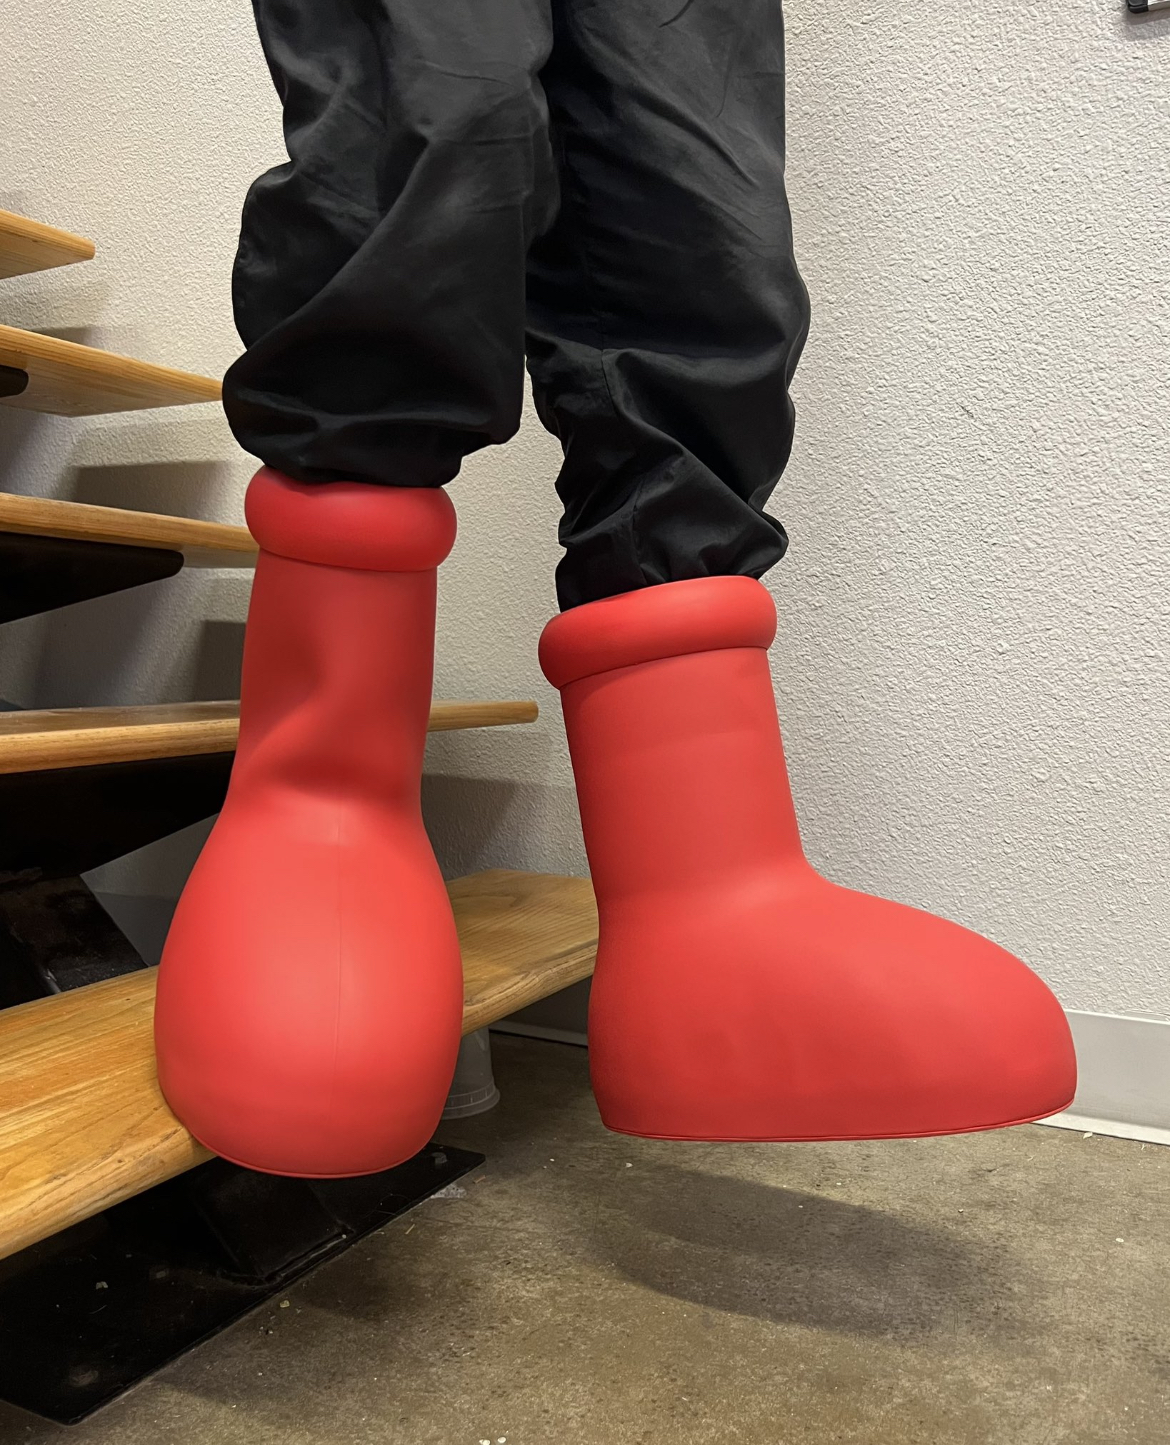 New Release: MSCHF Big Red Boots inspired by ‘Astro Boy’